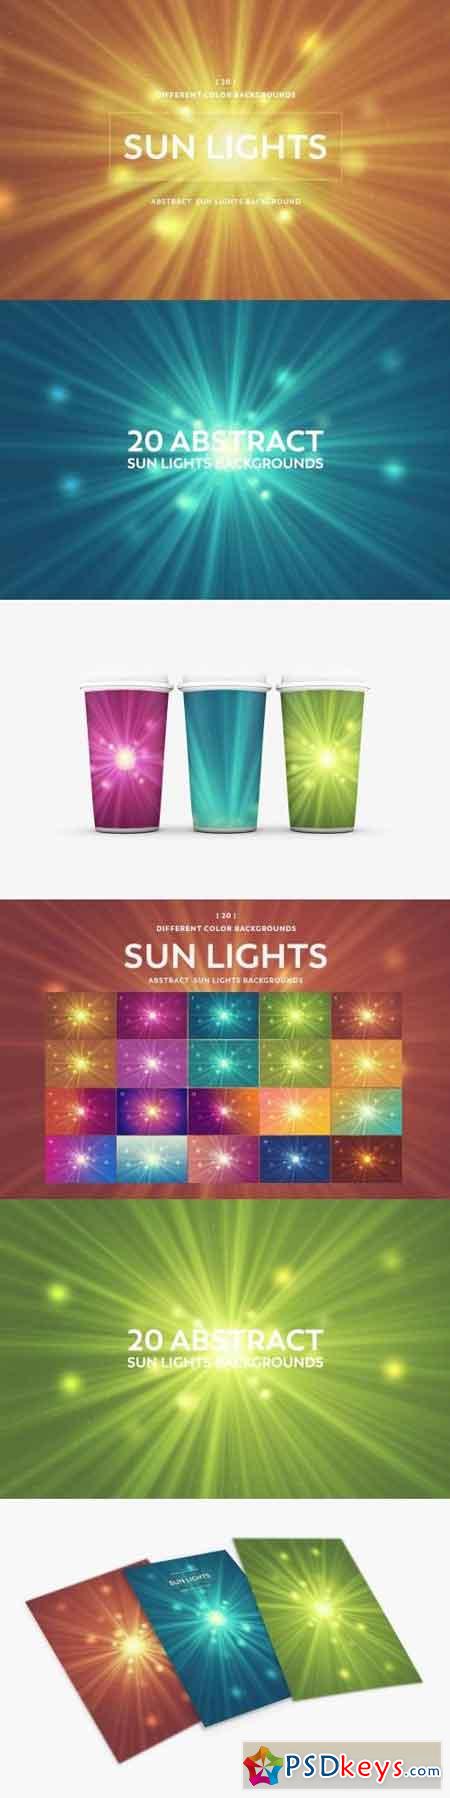 Abstract Sun Lights Backgrounds